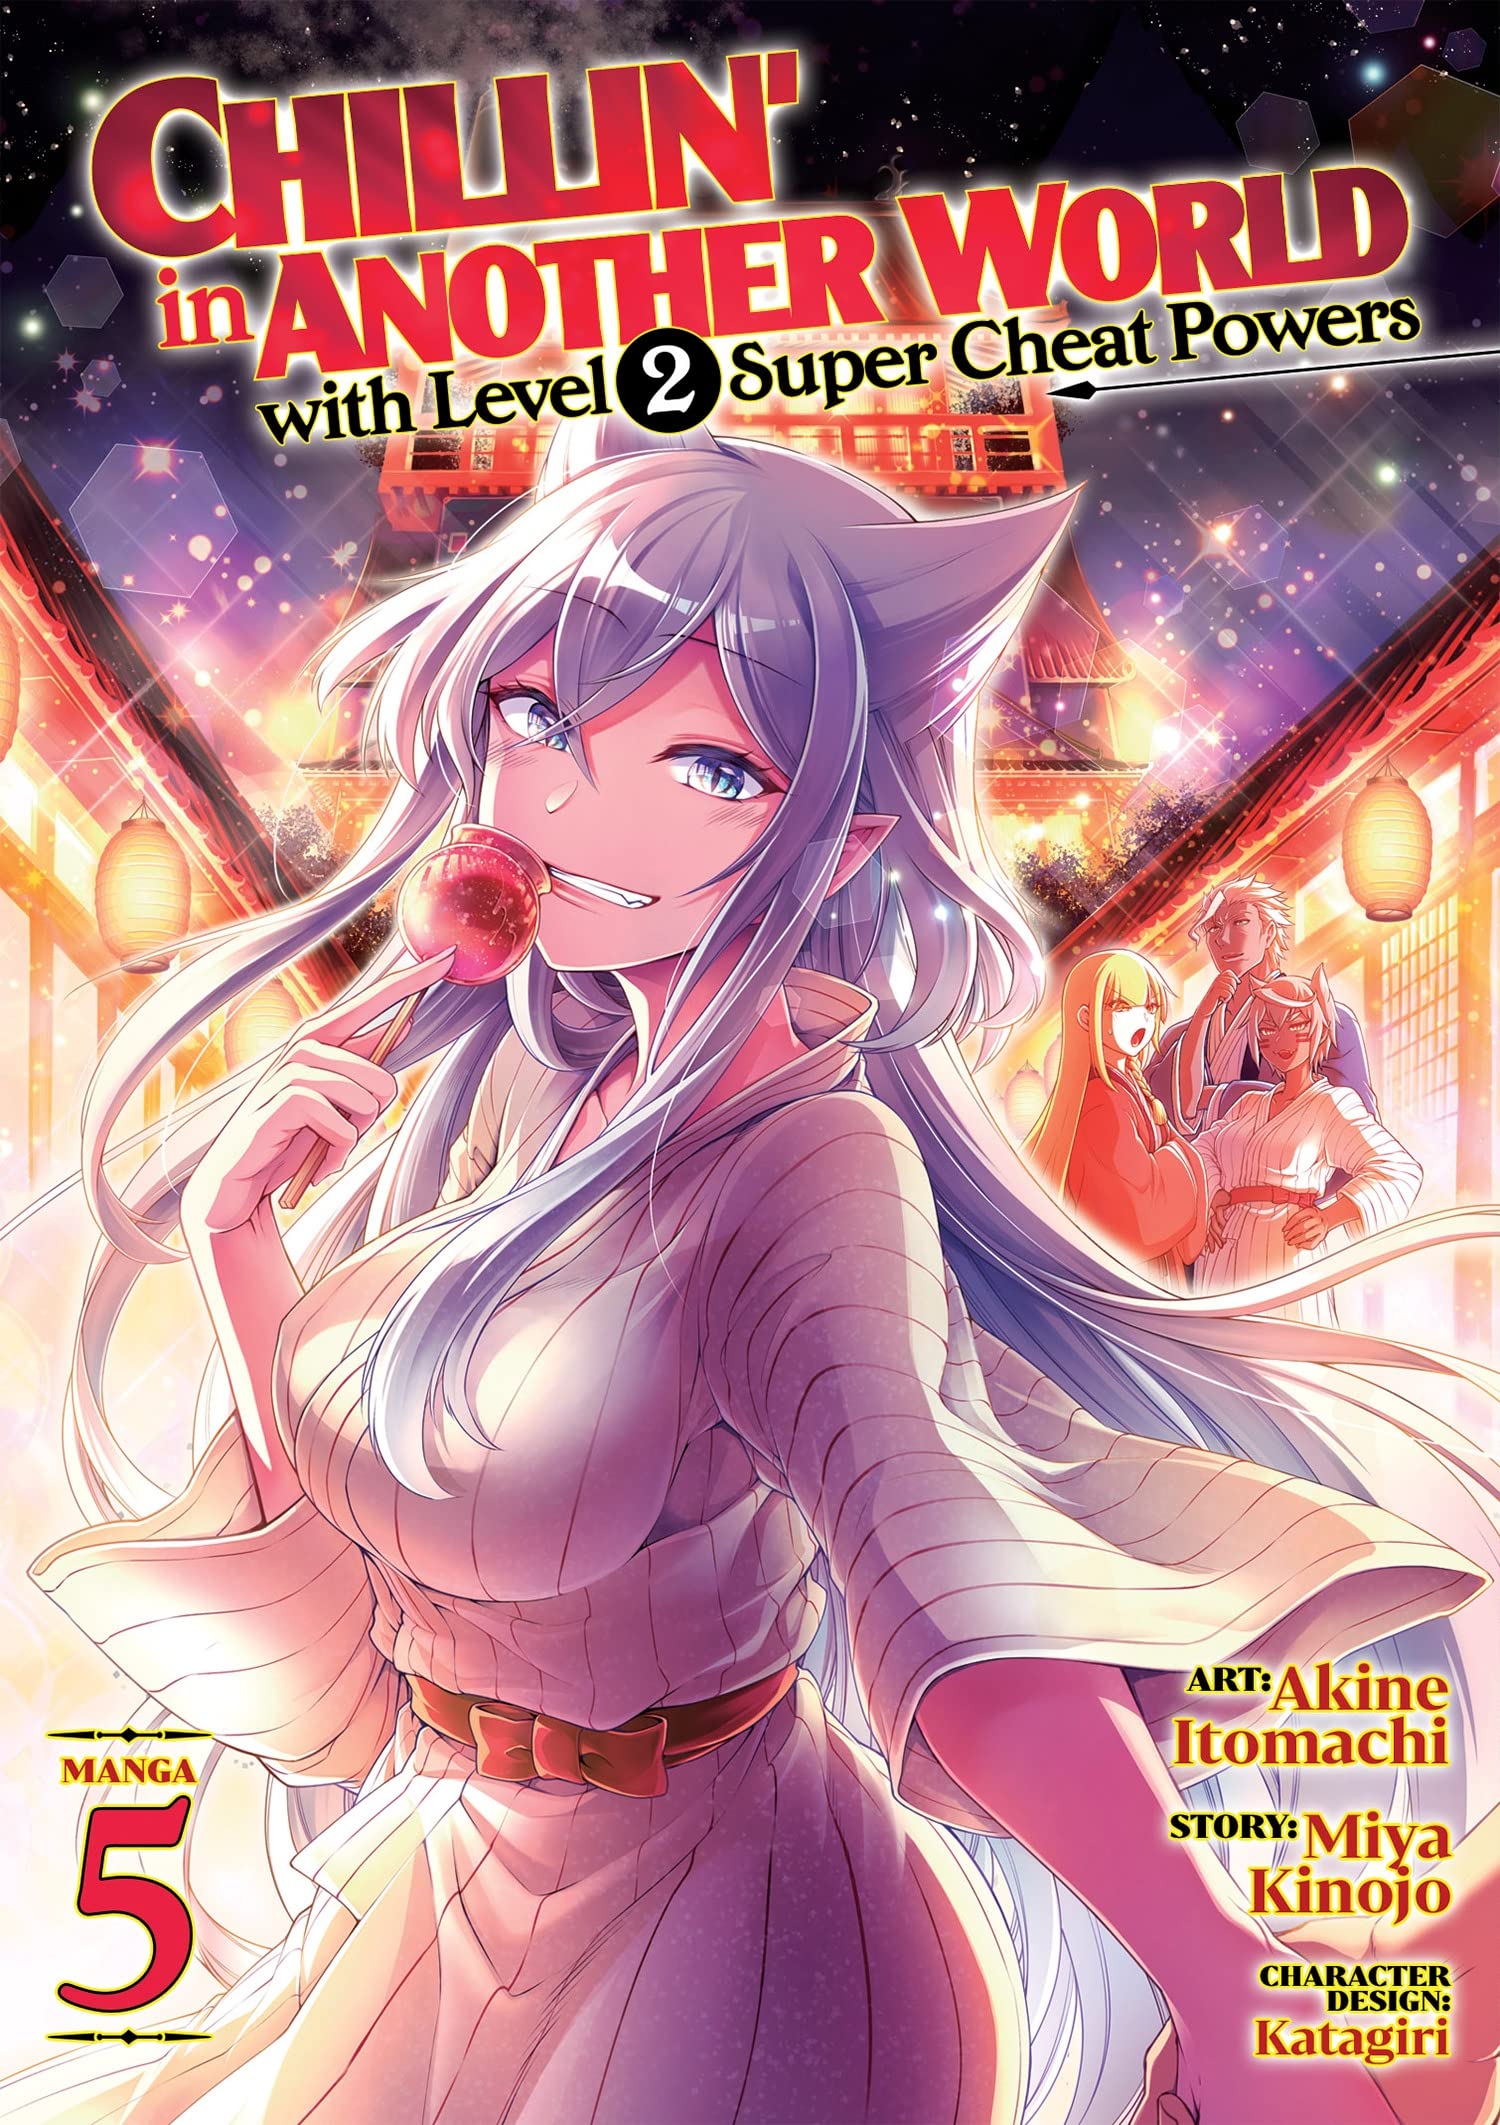 Chillin’ in Another World with Level 2 Super Cheat Powers (Manga) Vol. 05